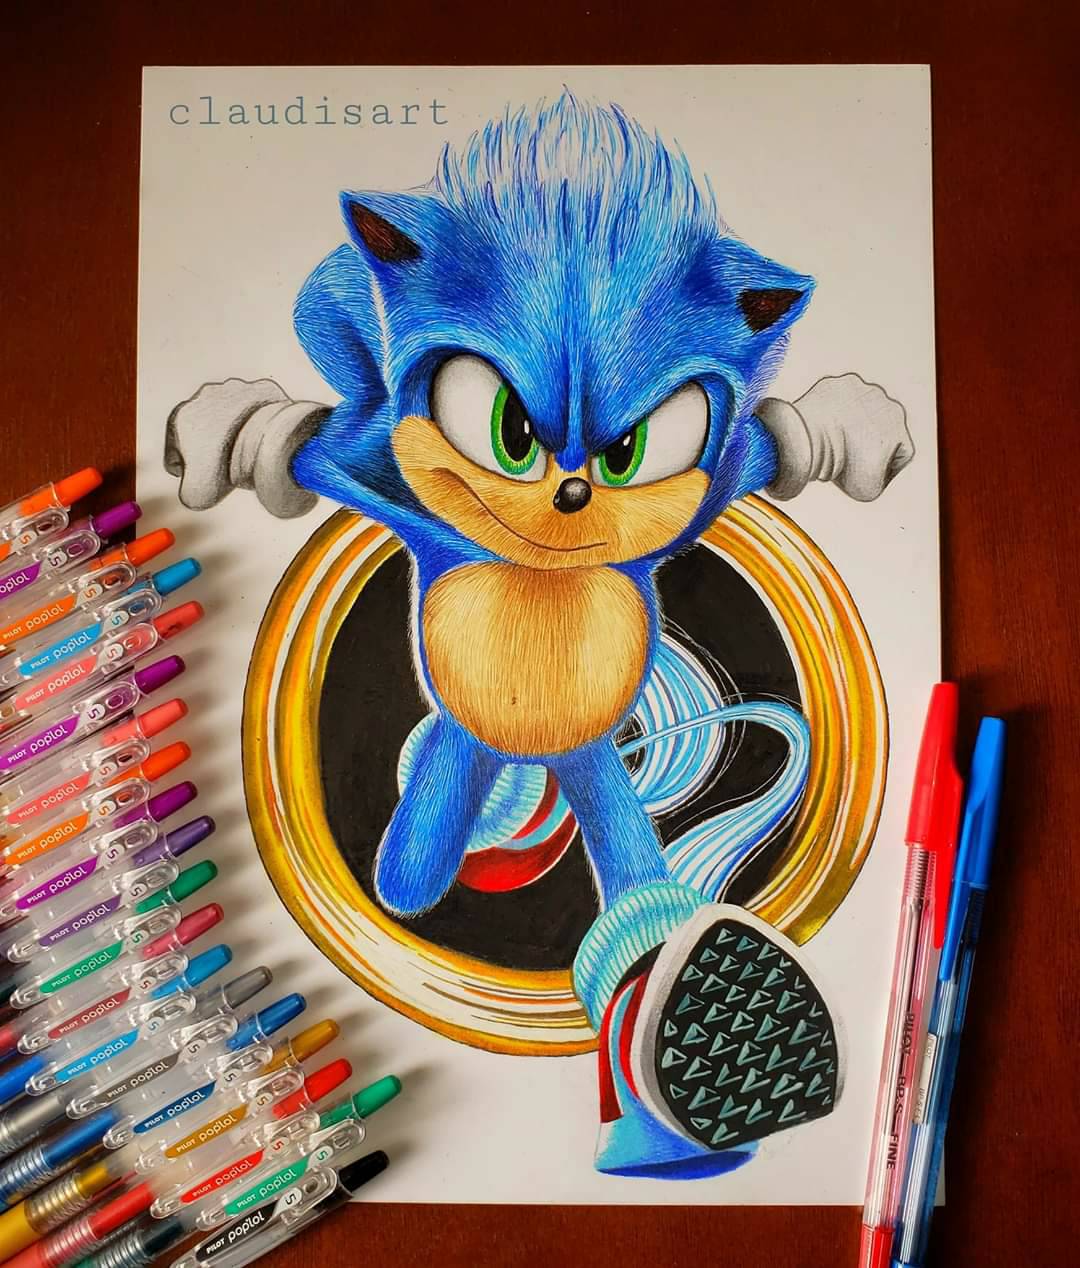 Sonic a lapiceros by claudisart22 on DeviantArt